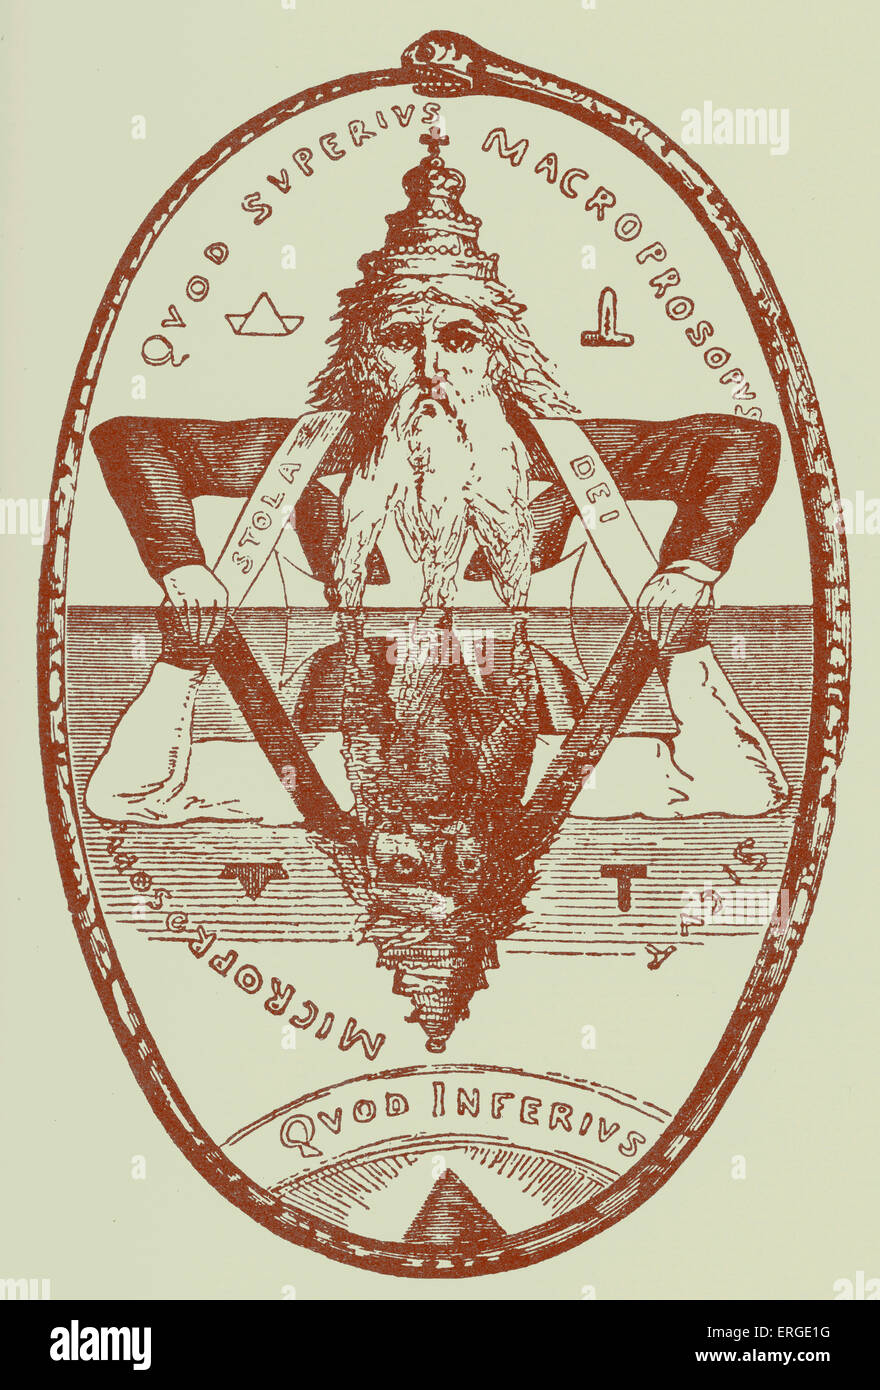 The Great Symbol of Solomon- from illustration by  Eliphas Lévi, published in his work 'The History of magic', translated by Stock Photo